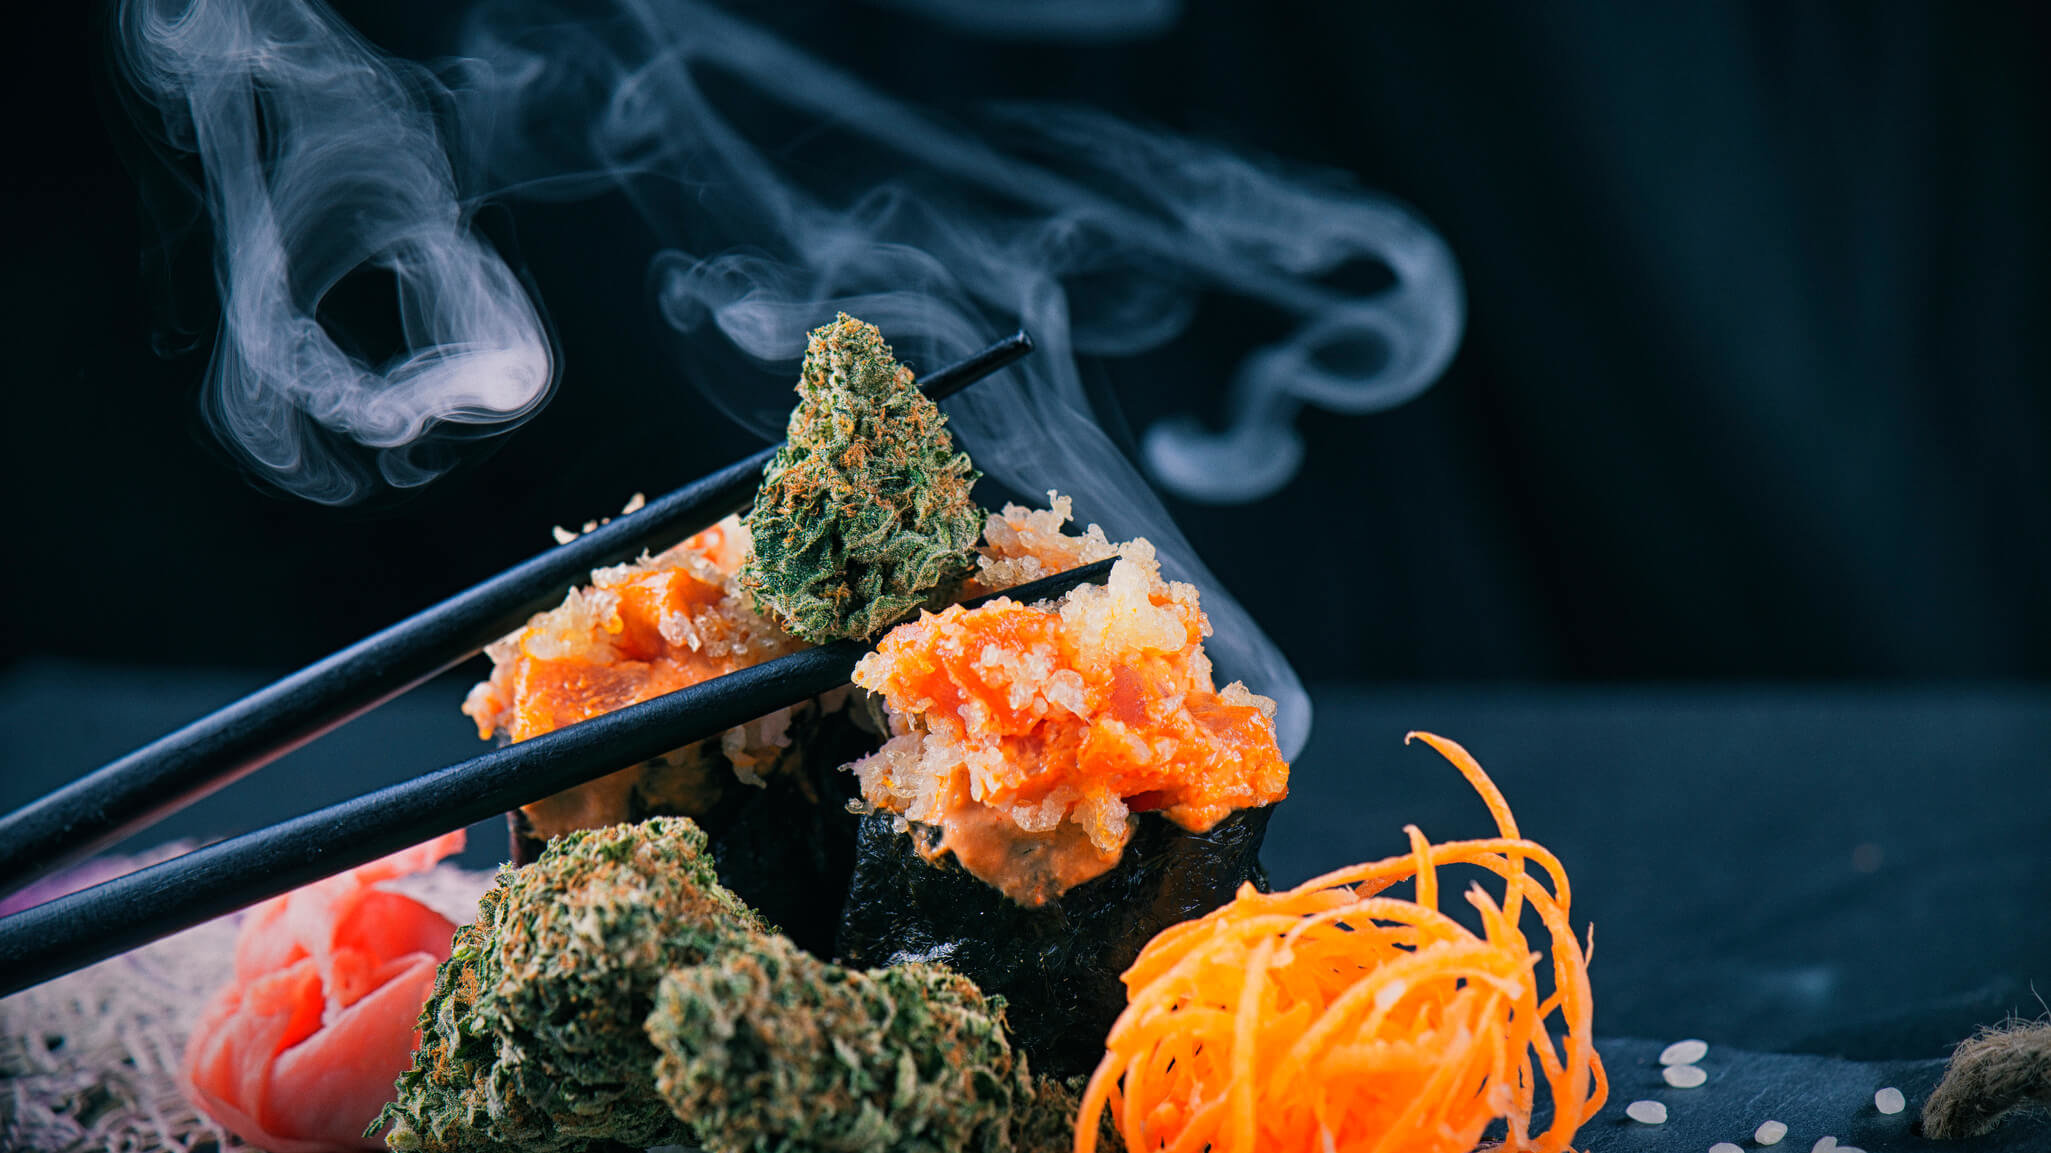 Cannabis buds served on a sushi roll with smoke and chopsticks on a dark background